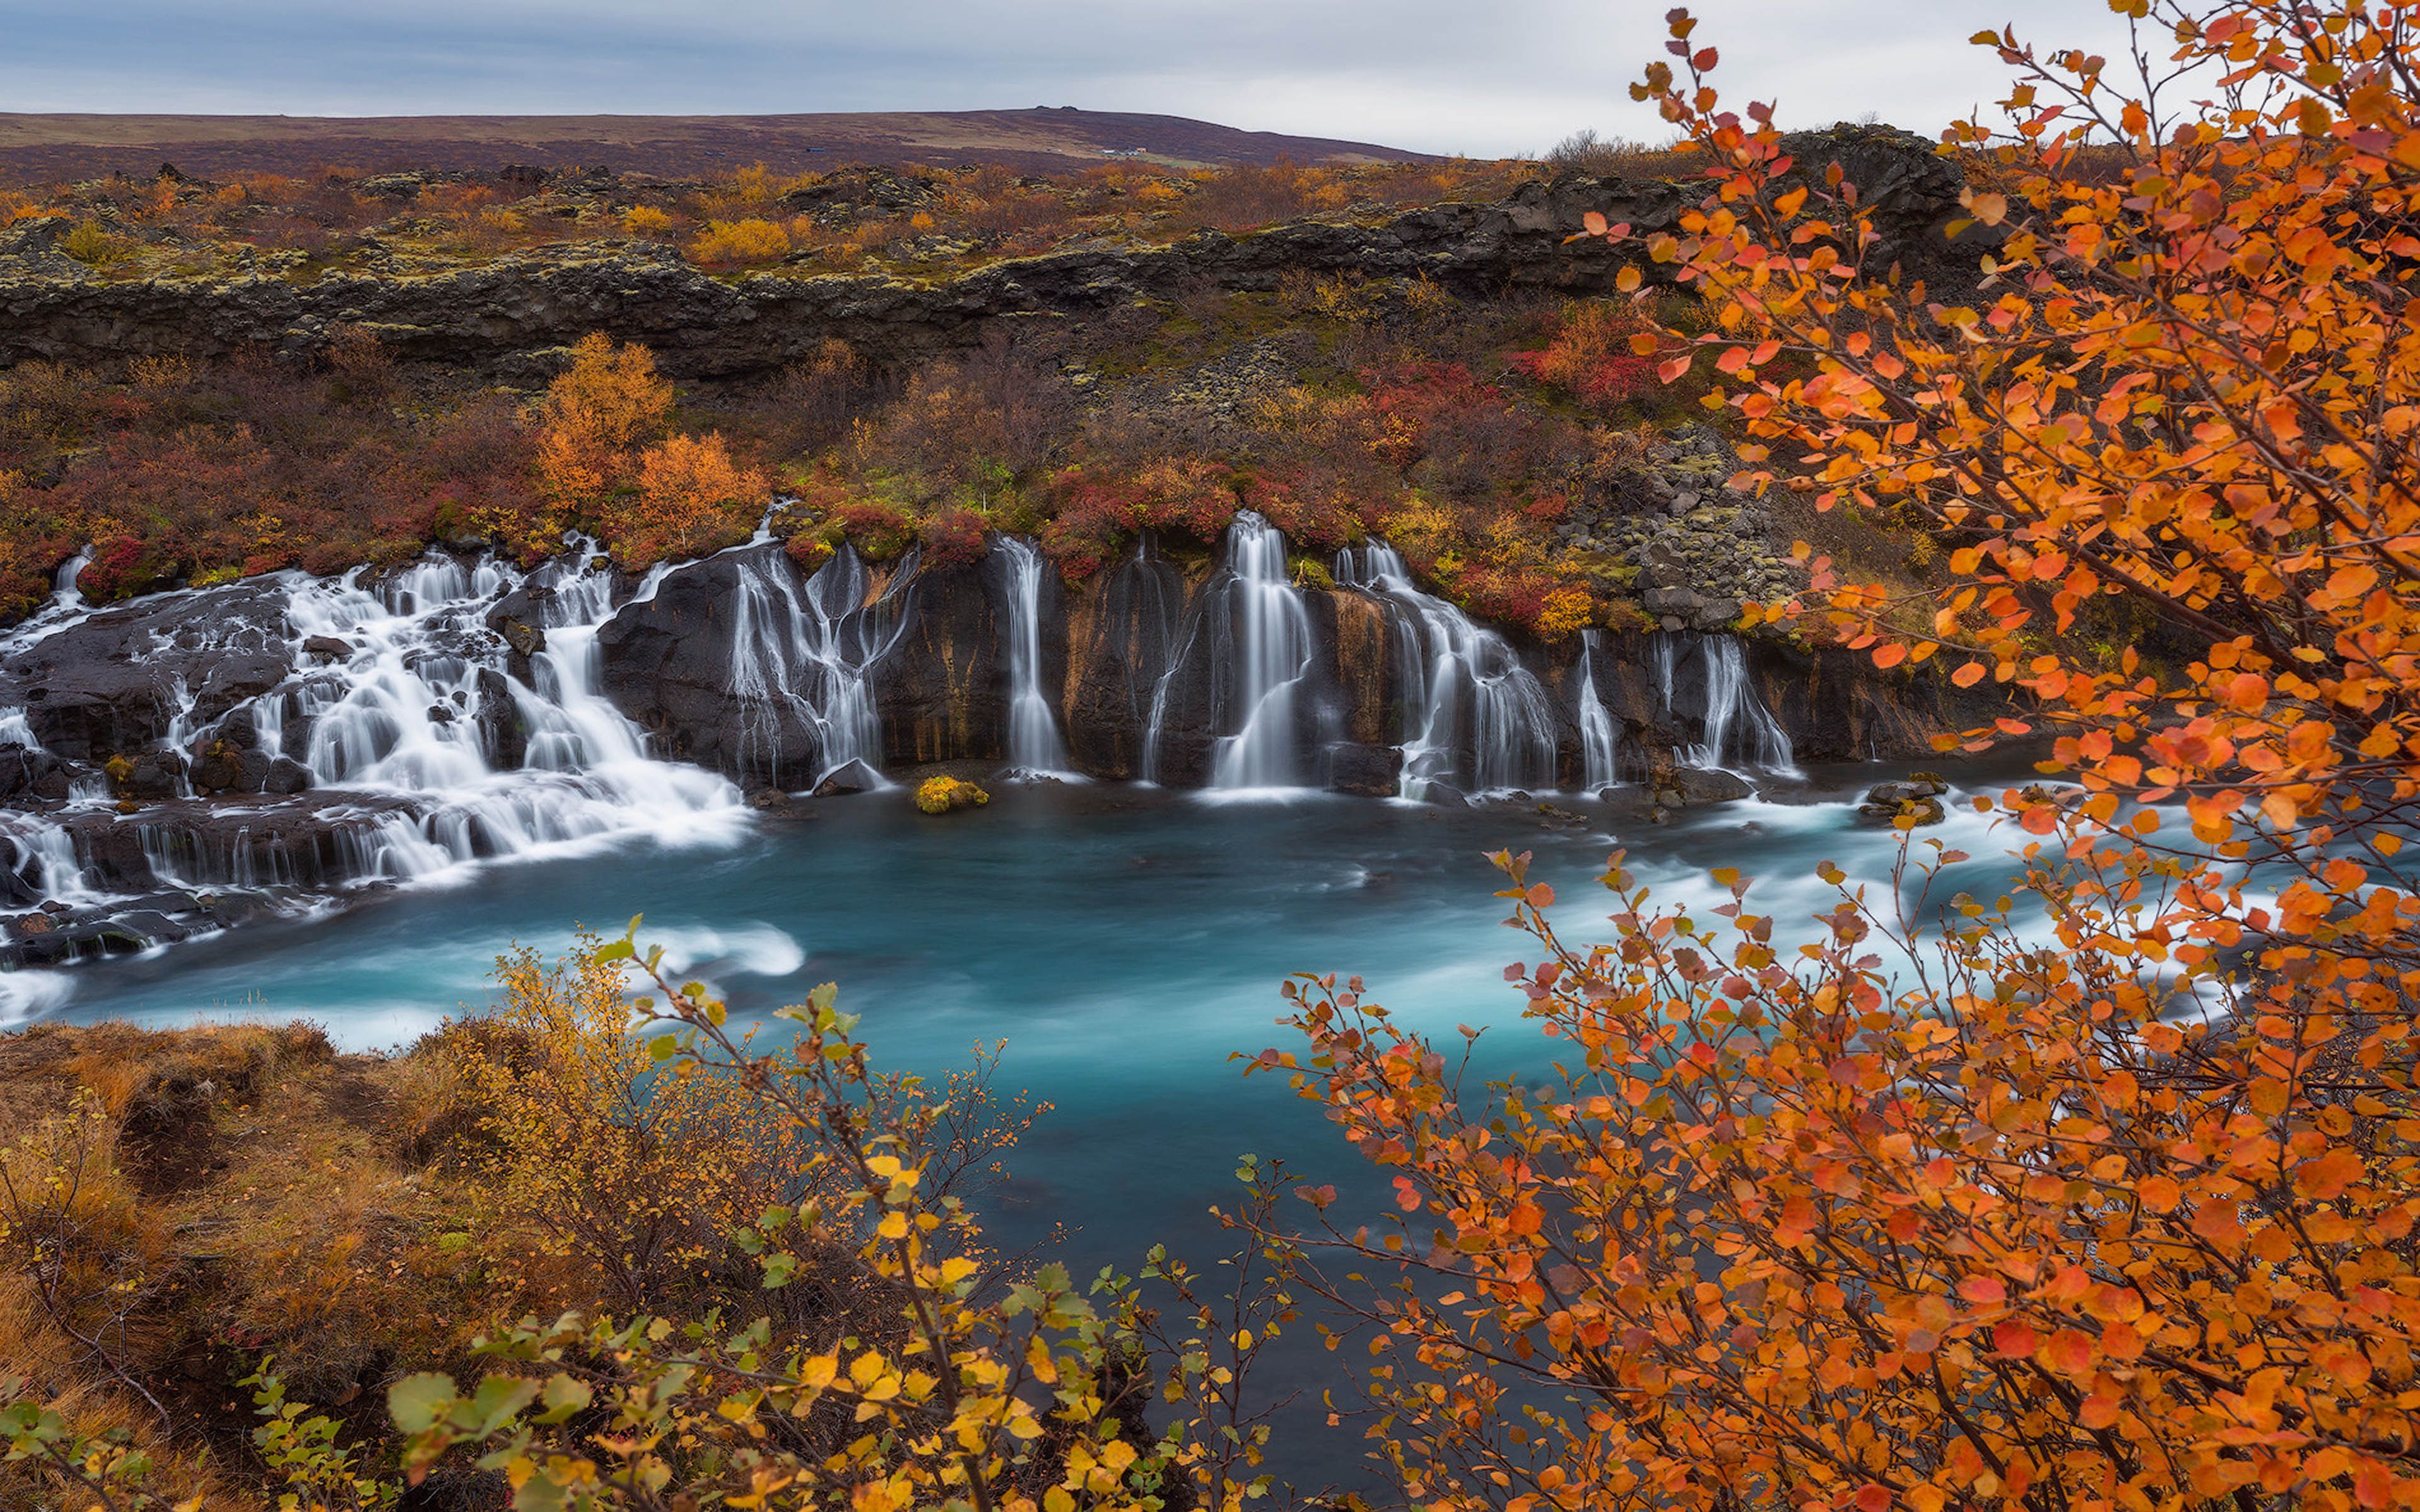 Hraunfossar Is A Waterfall In Iceland Autumn Landscape Photography From Iceland 4k Ultra HD Desktop Background For Pc Mac Laptop Tablet Mobile Phone, Wallpaper13.com